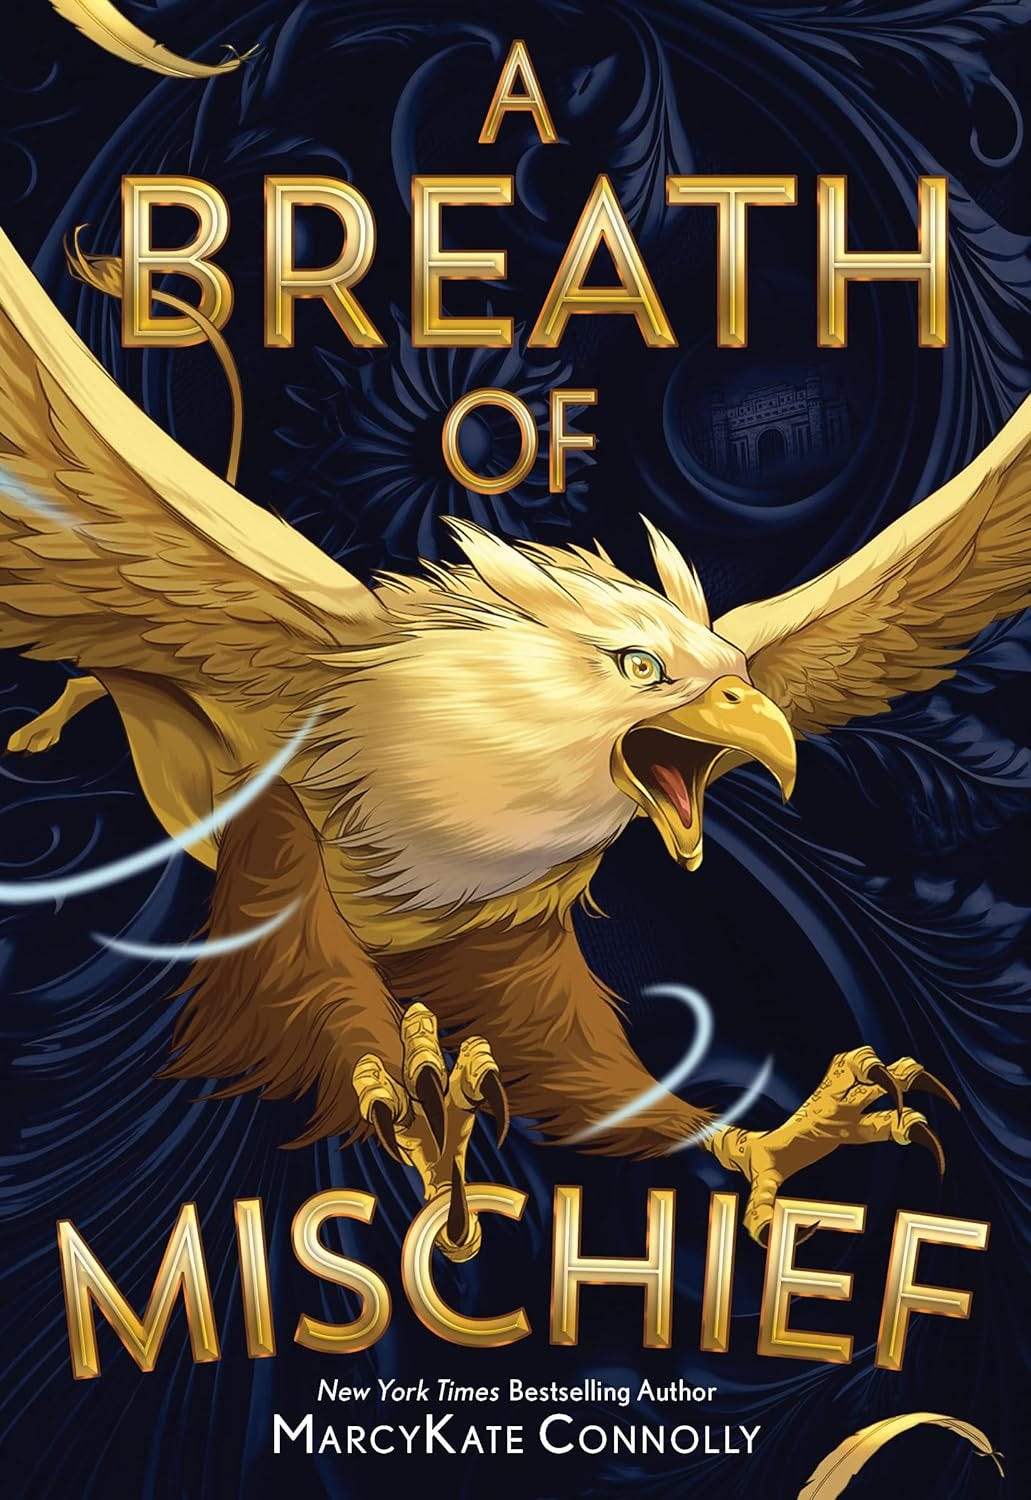 The cover of A Breath of Mischief shows a golden mythical bird flying toward the reader